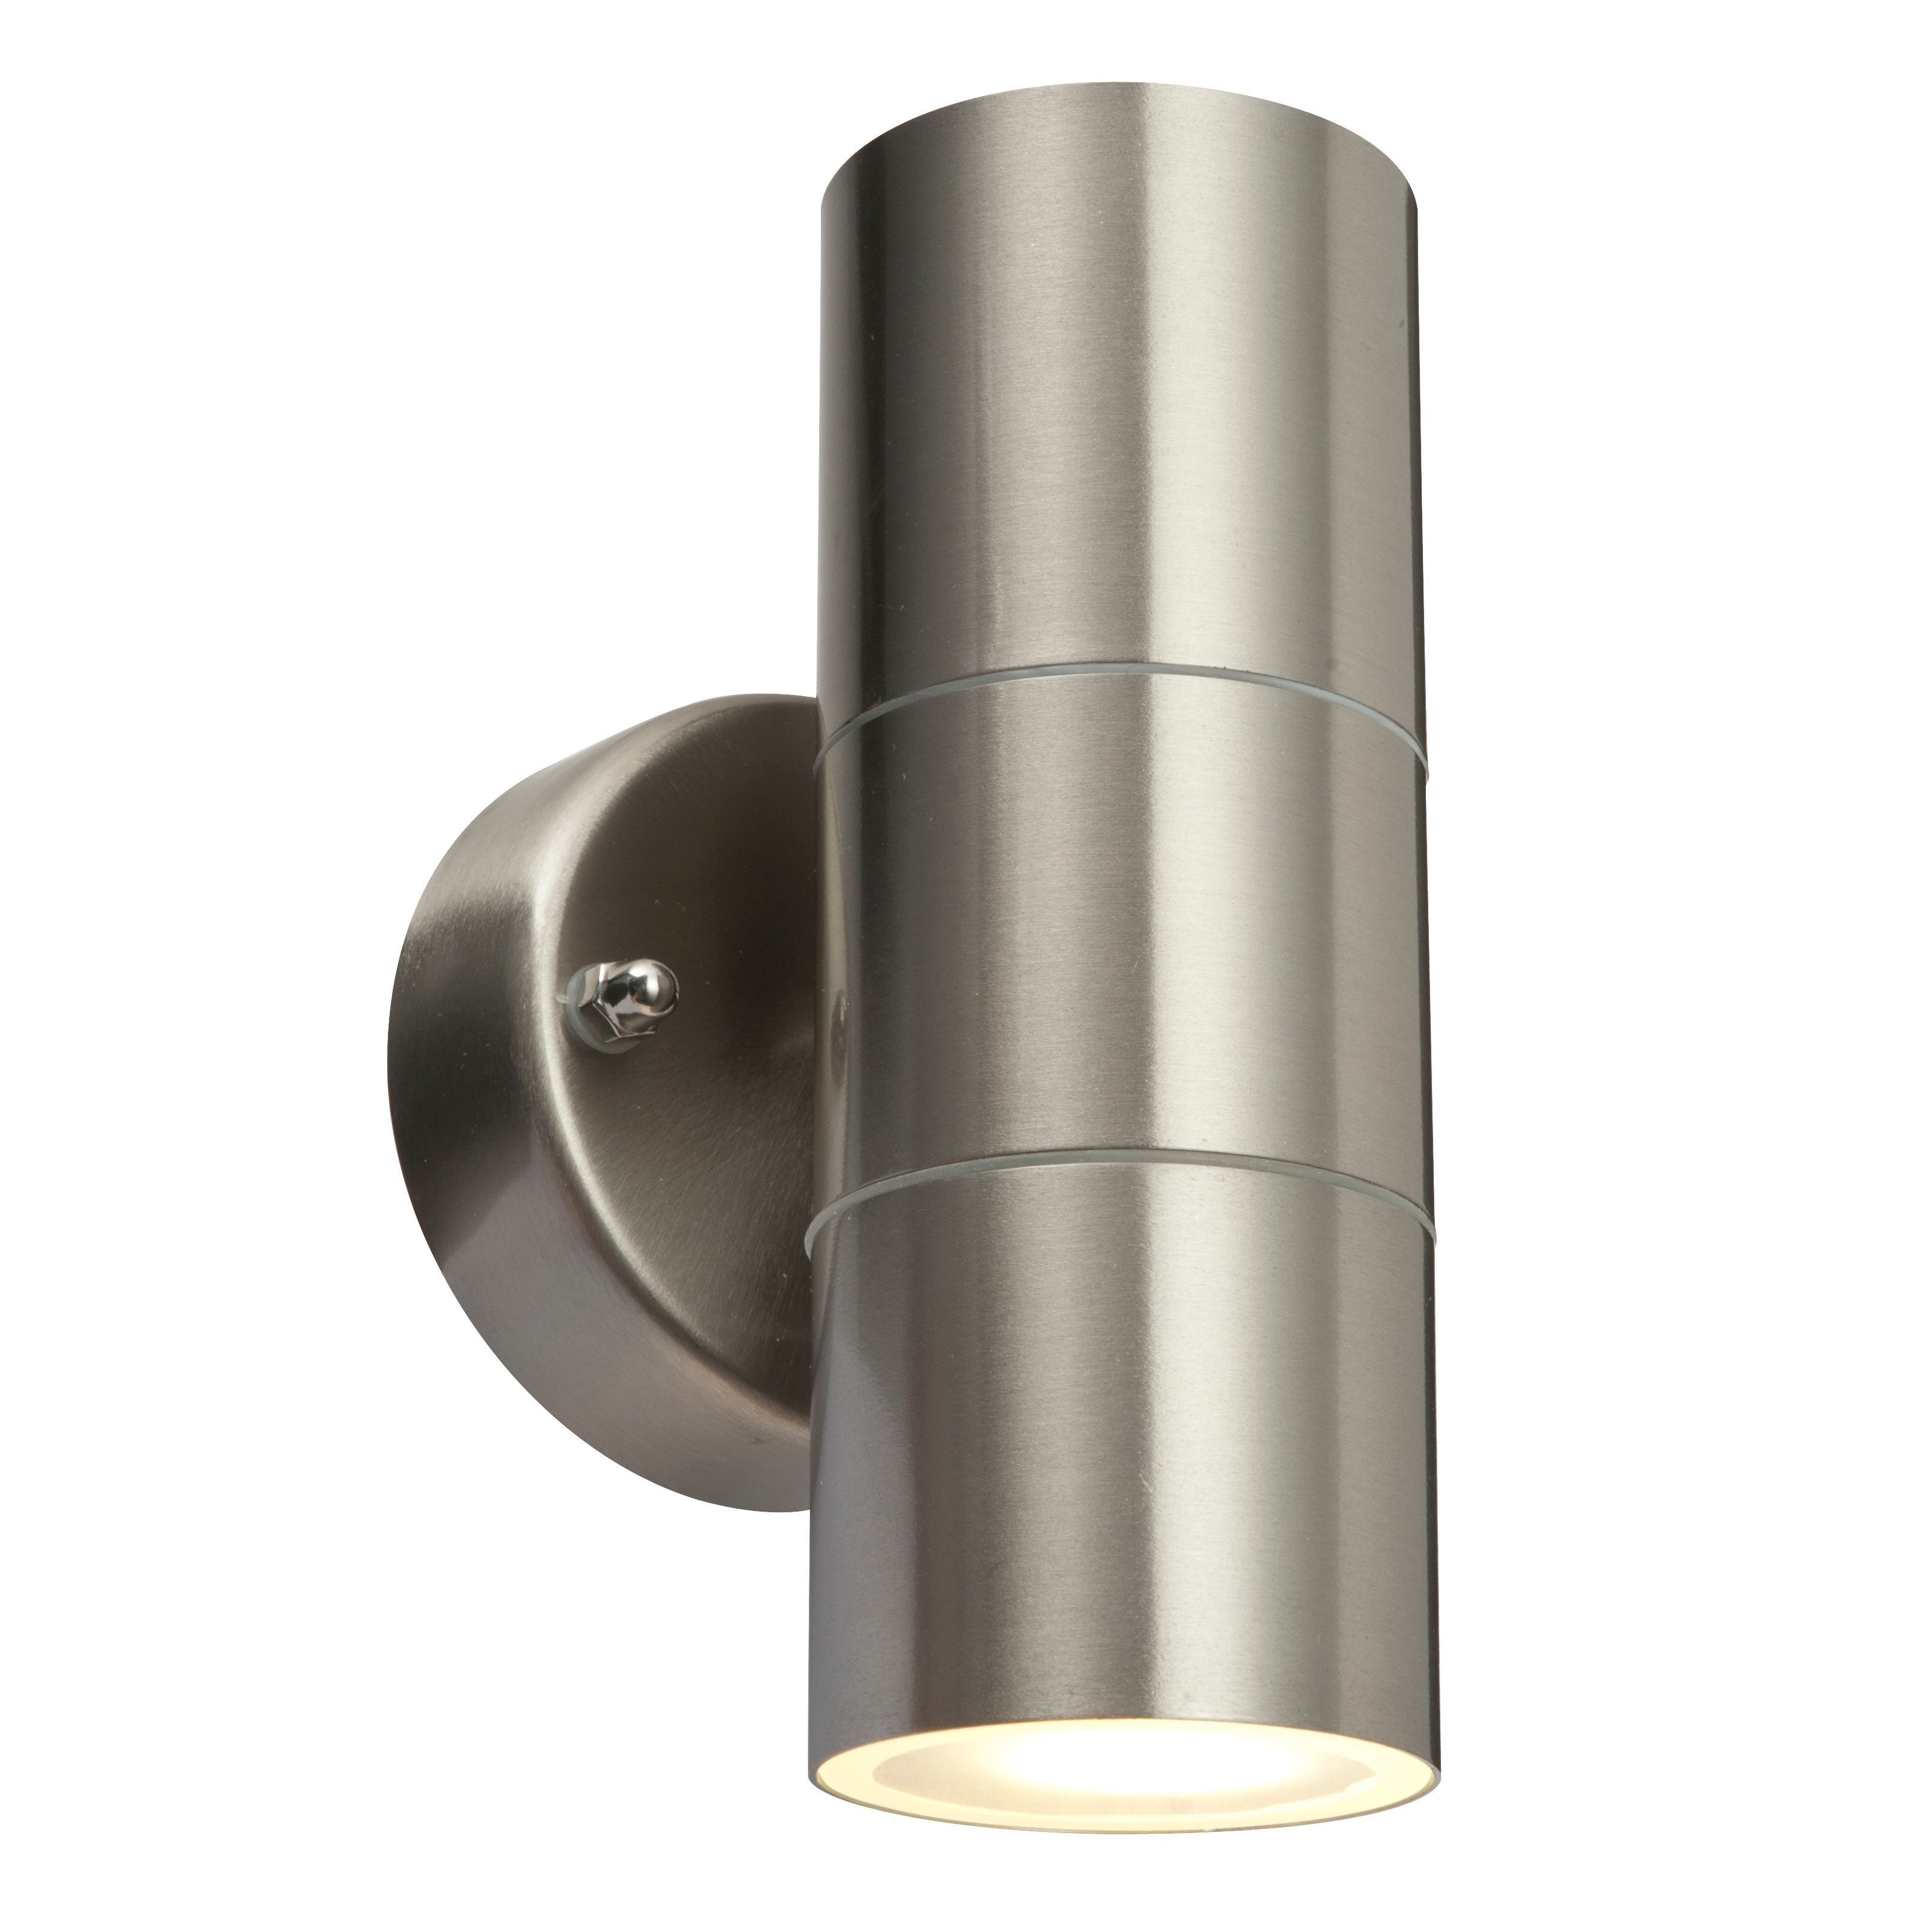 Blooma Sommus Stainless Steel Mains Powered External Up & Down Wall Inside Outdoor Wall Down Lighting (View 14 of 15)